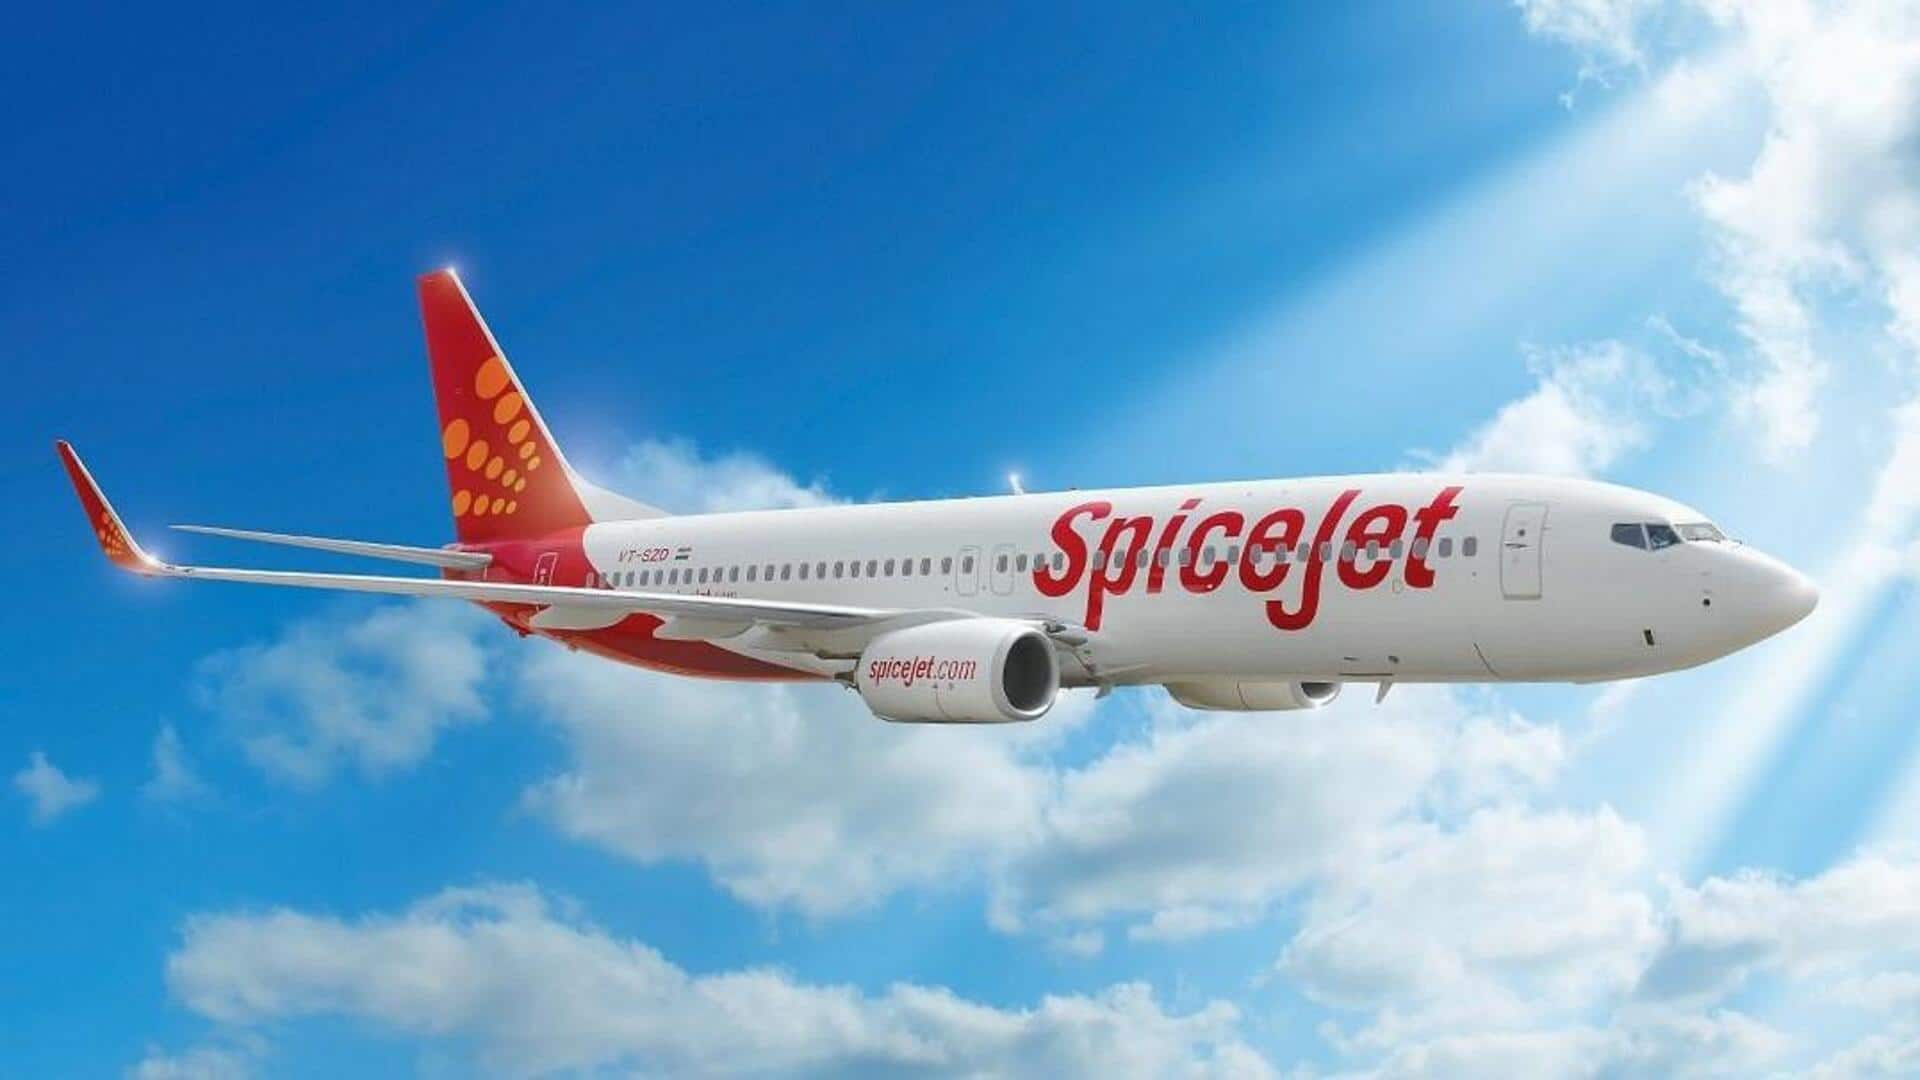 Mumbai-based couple acquires 19% stake in SpiceJet for Rs. 1,100cr